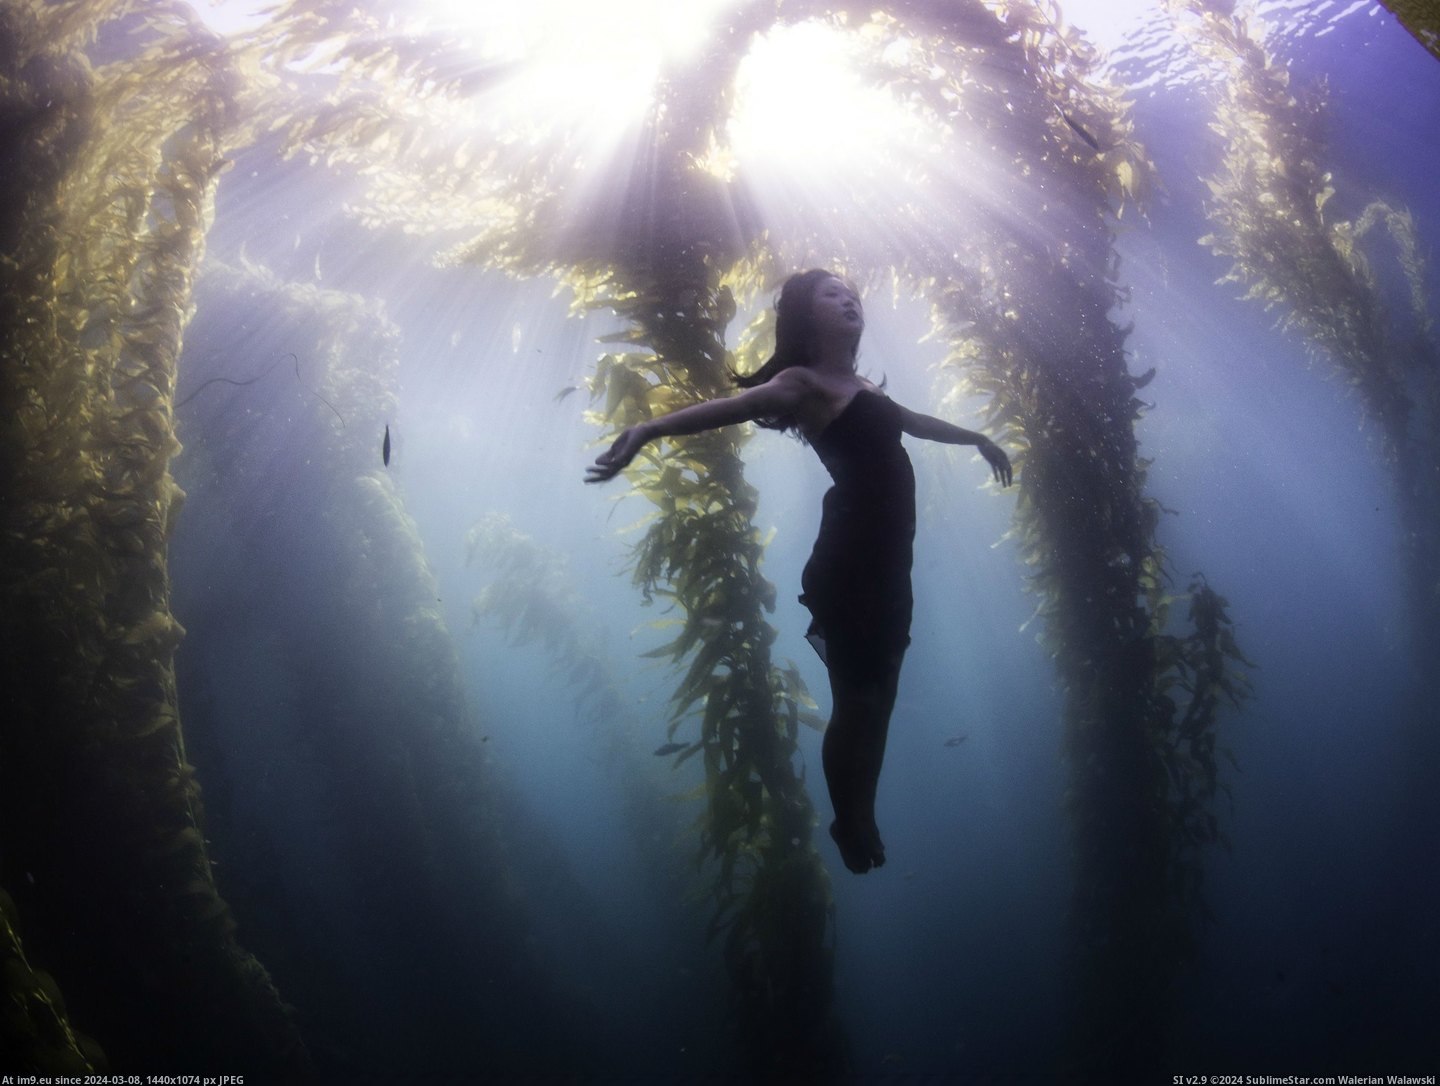 #You #Dress #Jump #Convinced #Kelp #Forest #Bought [Pics] Bought my gf a dress and convinced her to jump into the middle of a kelp forest. What do you think? Pic. (Bild von album My r/PICS favs))